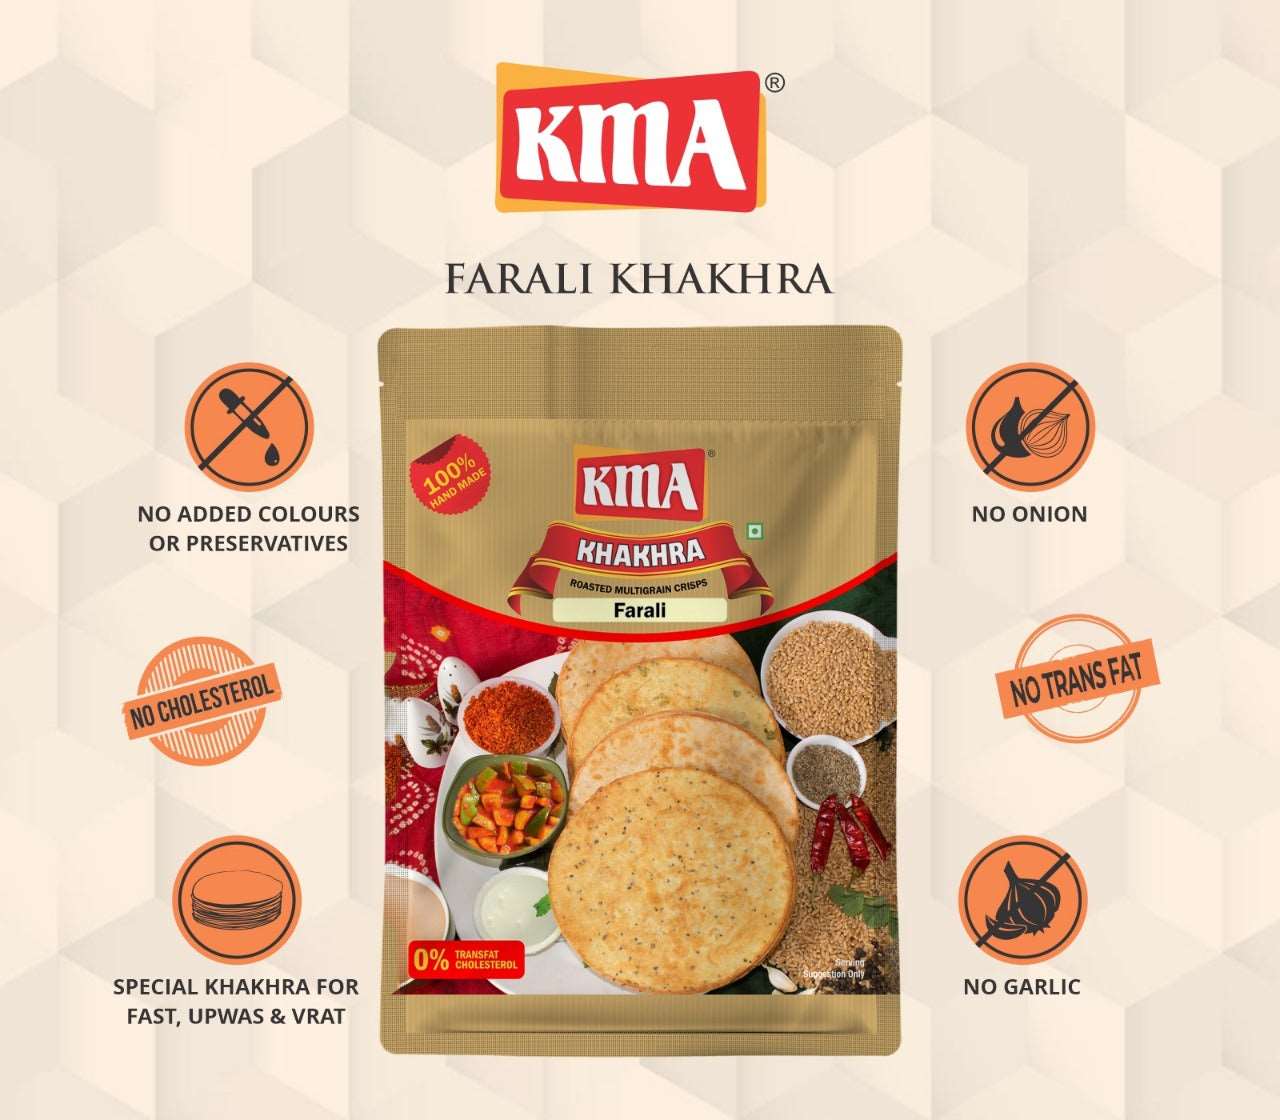 Our Vrat special KMA Farali Khakhra is made from a delicious blend of multigrain farali flours, ensuring a gluten-free snack that is both tasty and nutritious. With a shelf life of 6 months, you can be confident that you are receiving a fresh product manufactured in the same month.